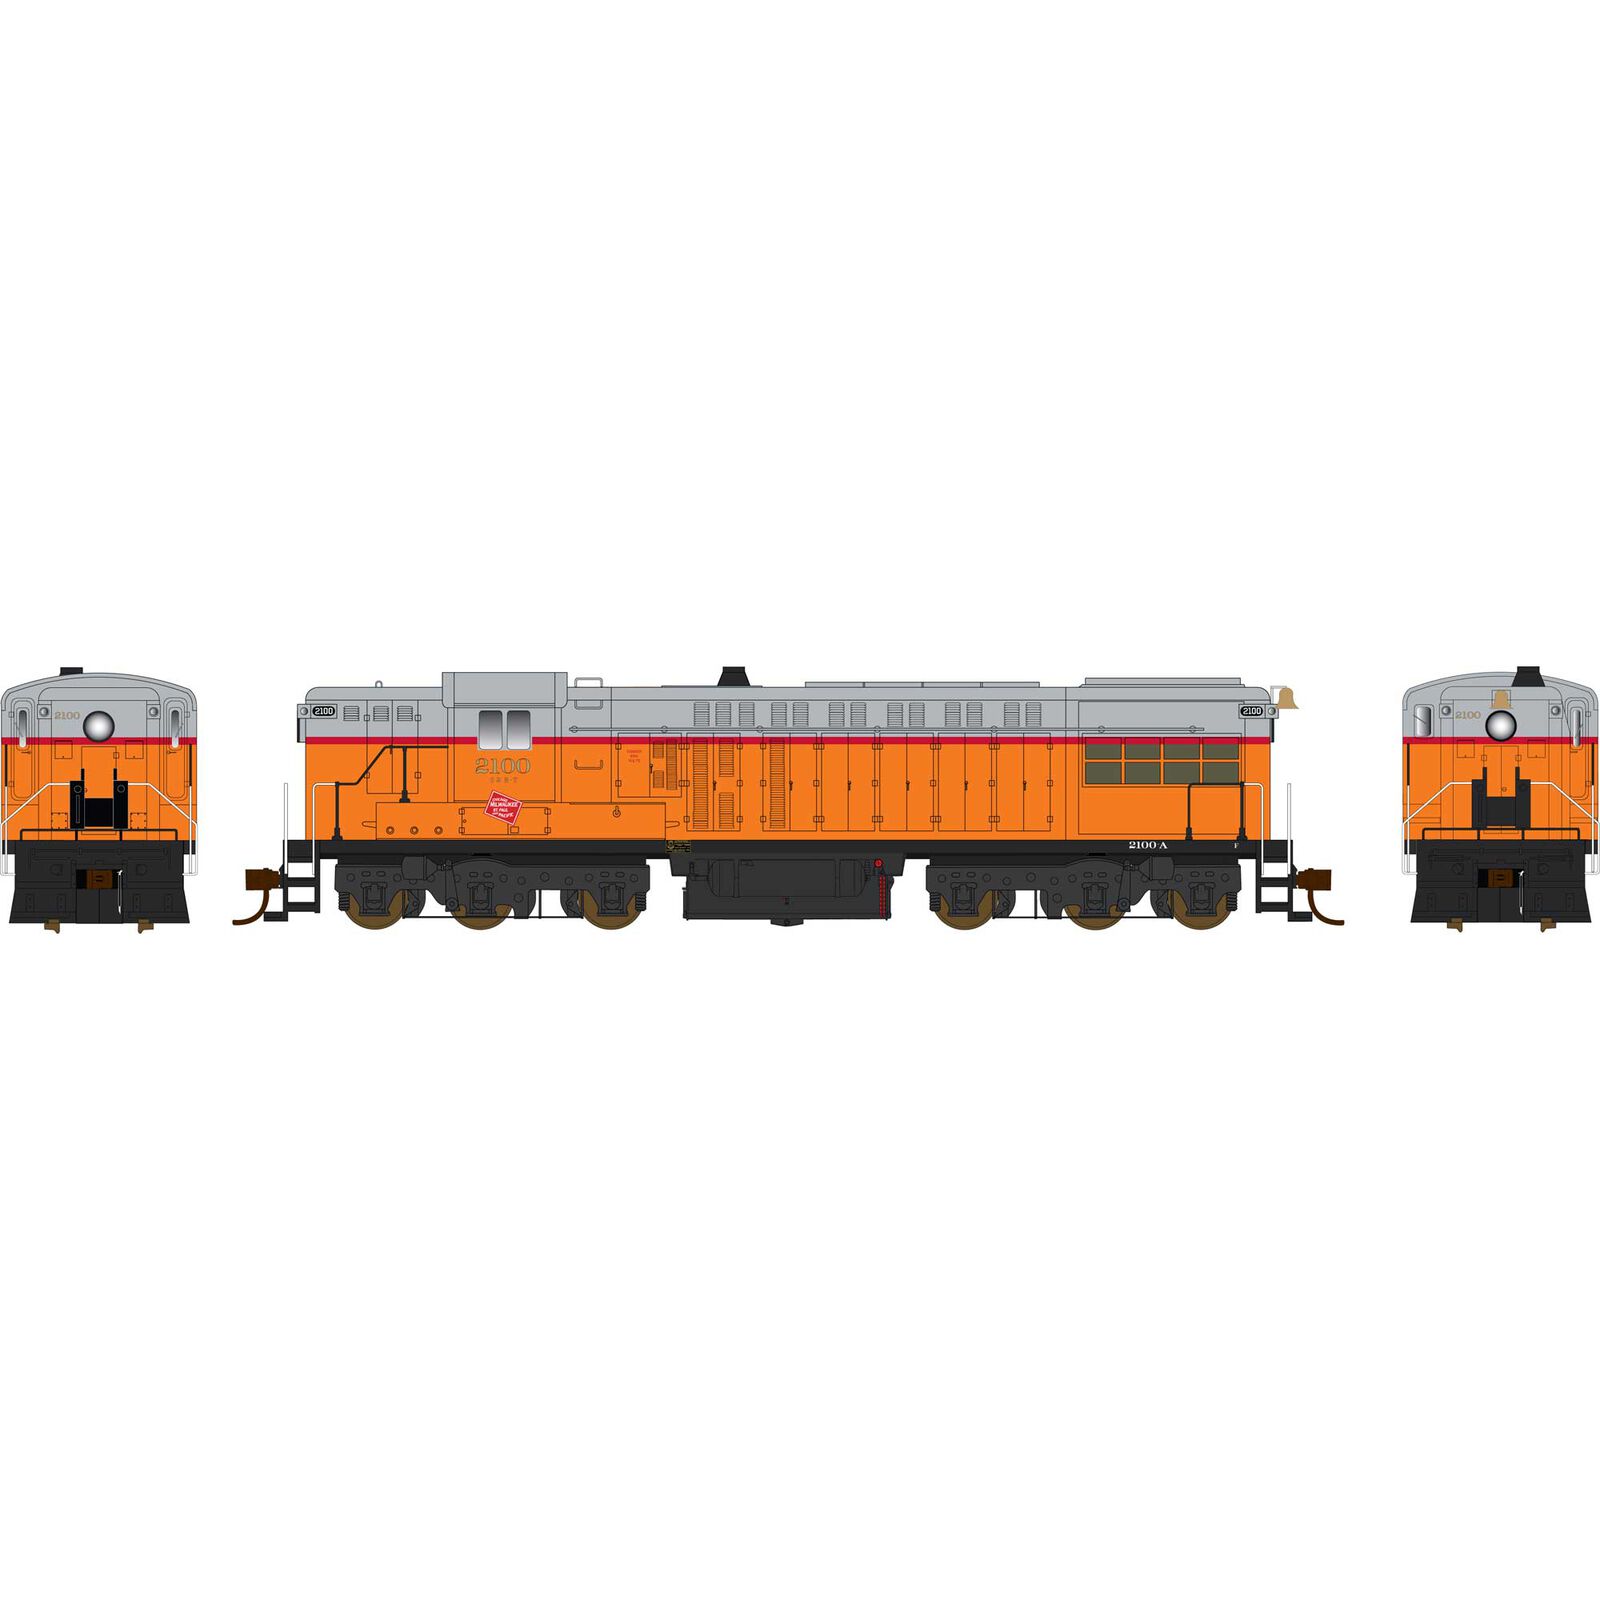 HO AS-616 MILW Loco #2100 with sound